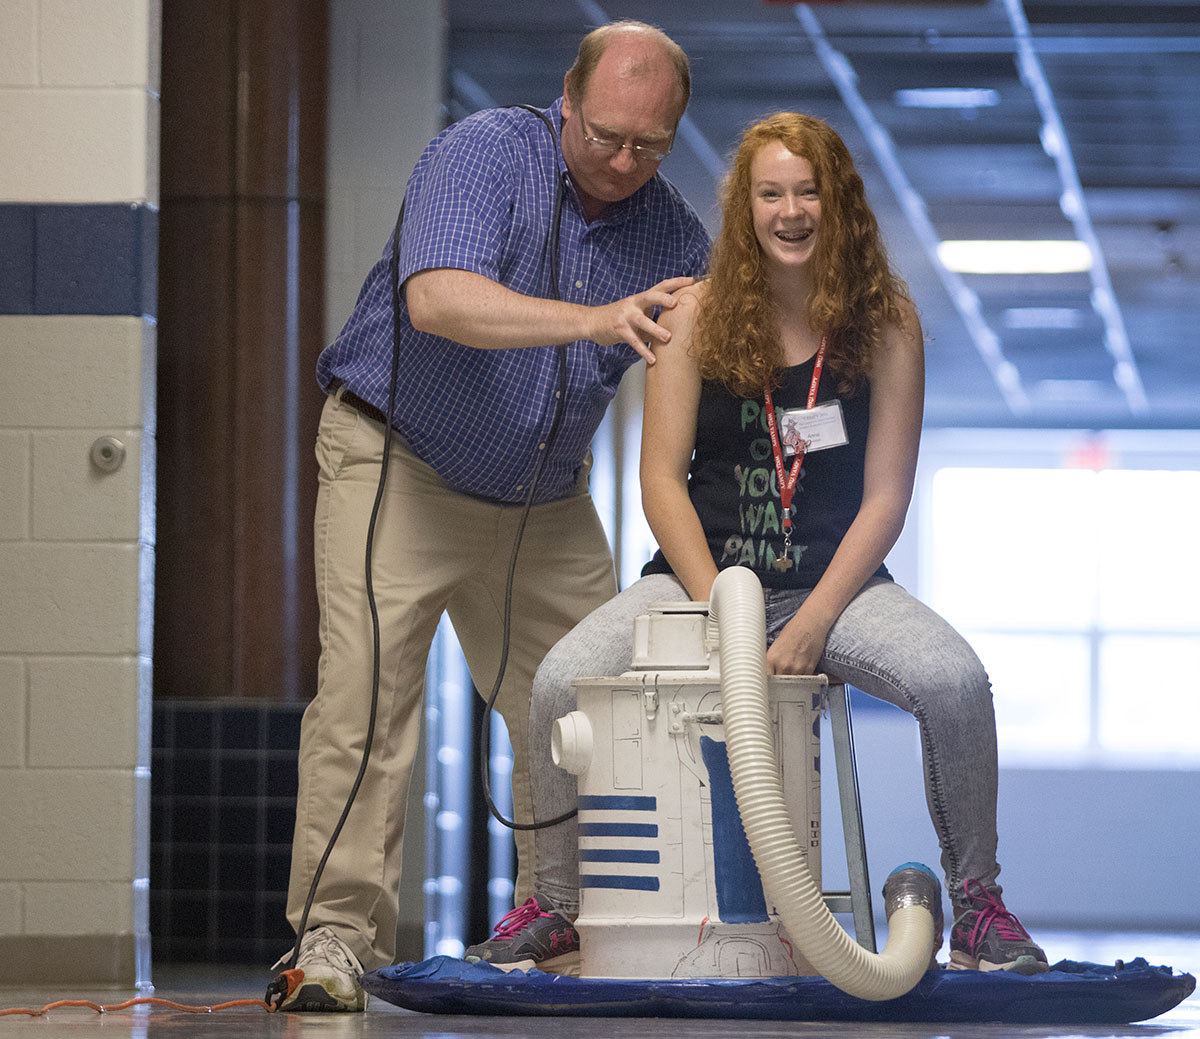 Physics teacher Kenny Lee prepares to push Anna Duncan from Chattanooga, Tenn., on a hovercraft down a hallway at Warren Central High School, where Kenny teachers, during a class trip Wednesday, July 13. (Photo by Sam Oldenburg)